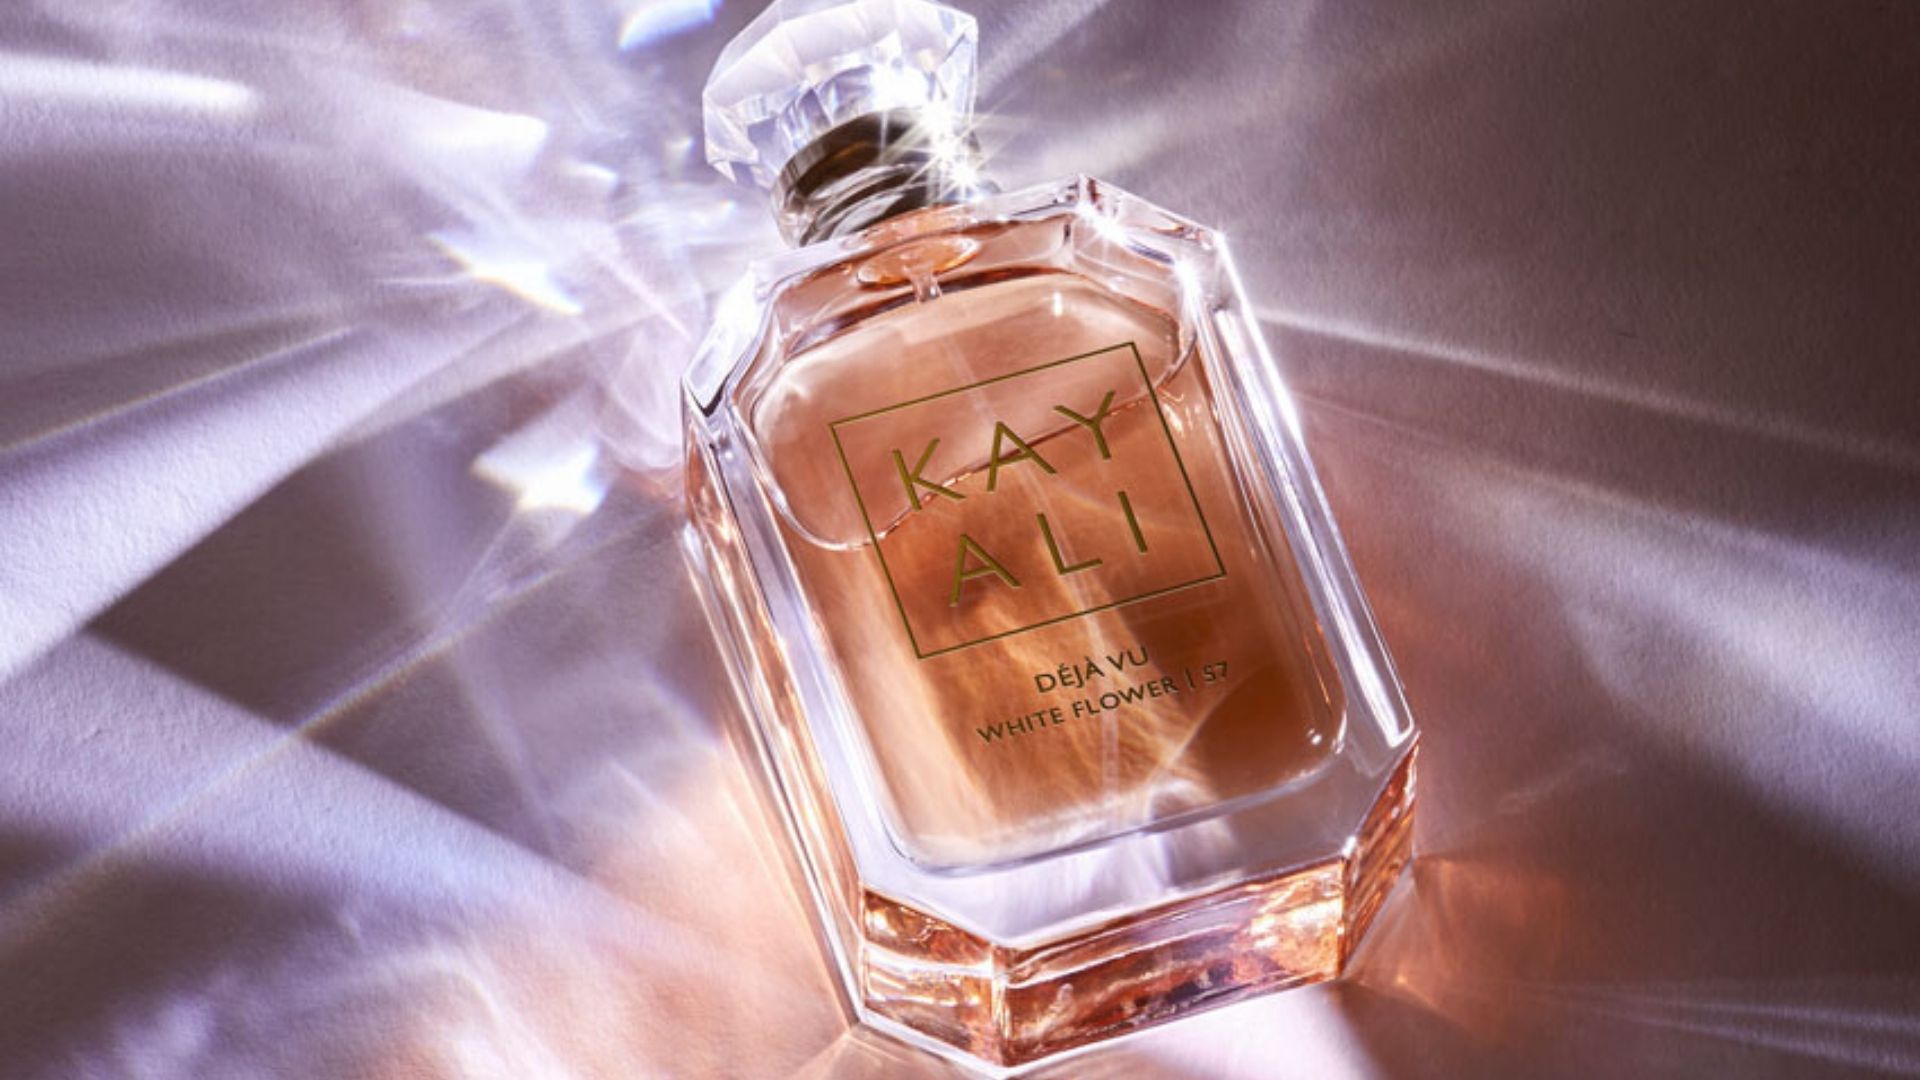 Mona Kattan just released her new fragrance and we're in love